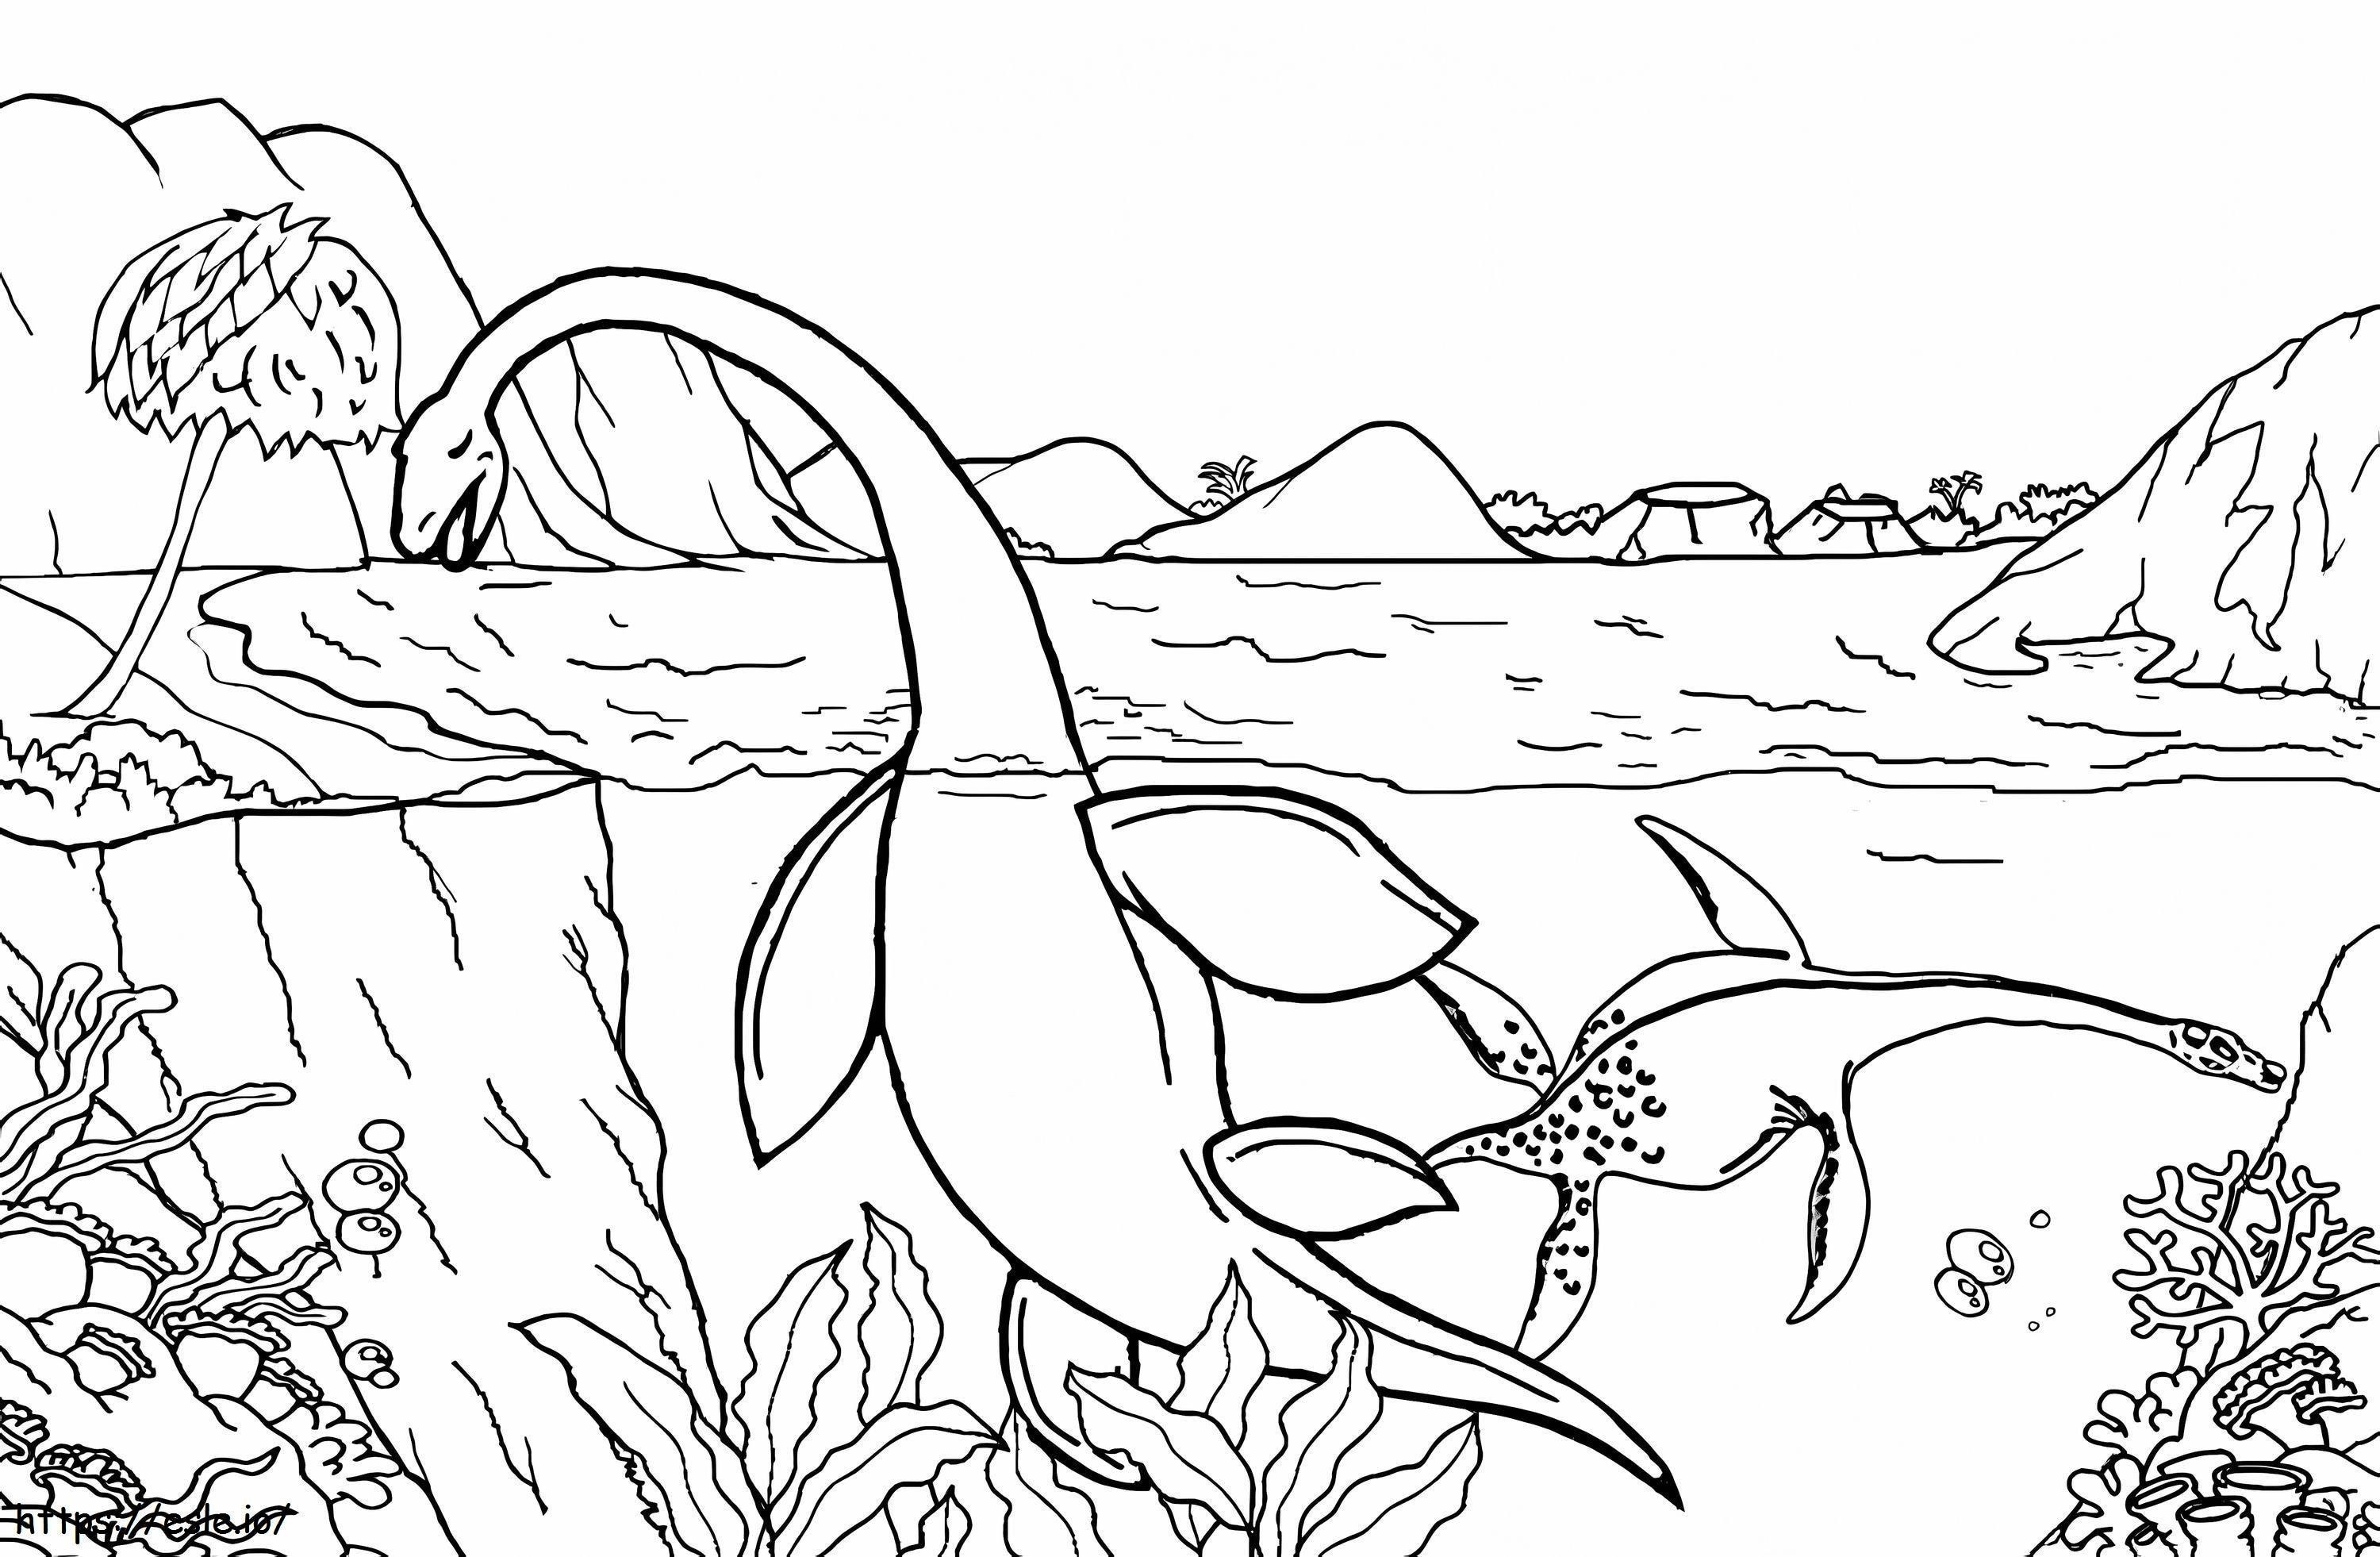 1541231335_Most_Dangerous_Jurassic_Creatures_Drawing_Sea_Dinosaur_Prehistoric_Ocean_Coloring_Pages_For_Children coloring page